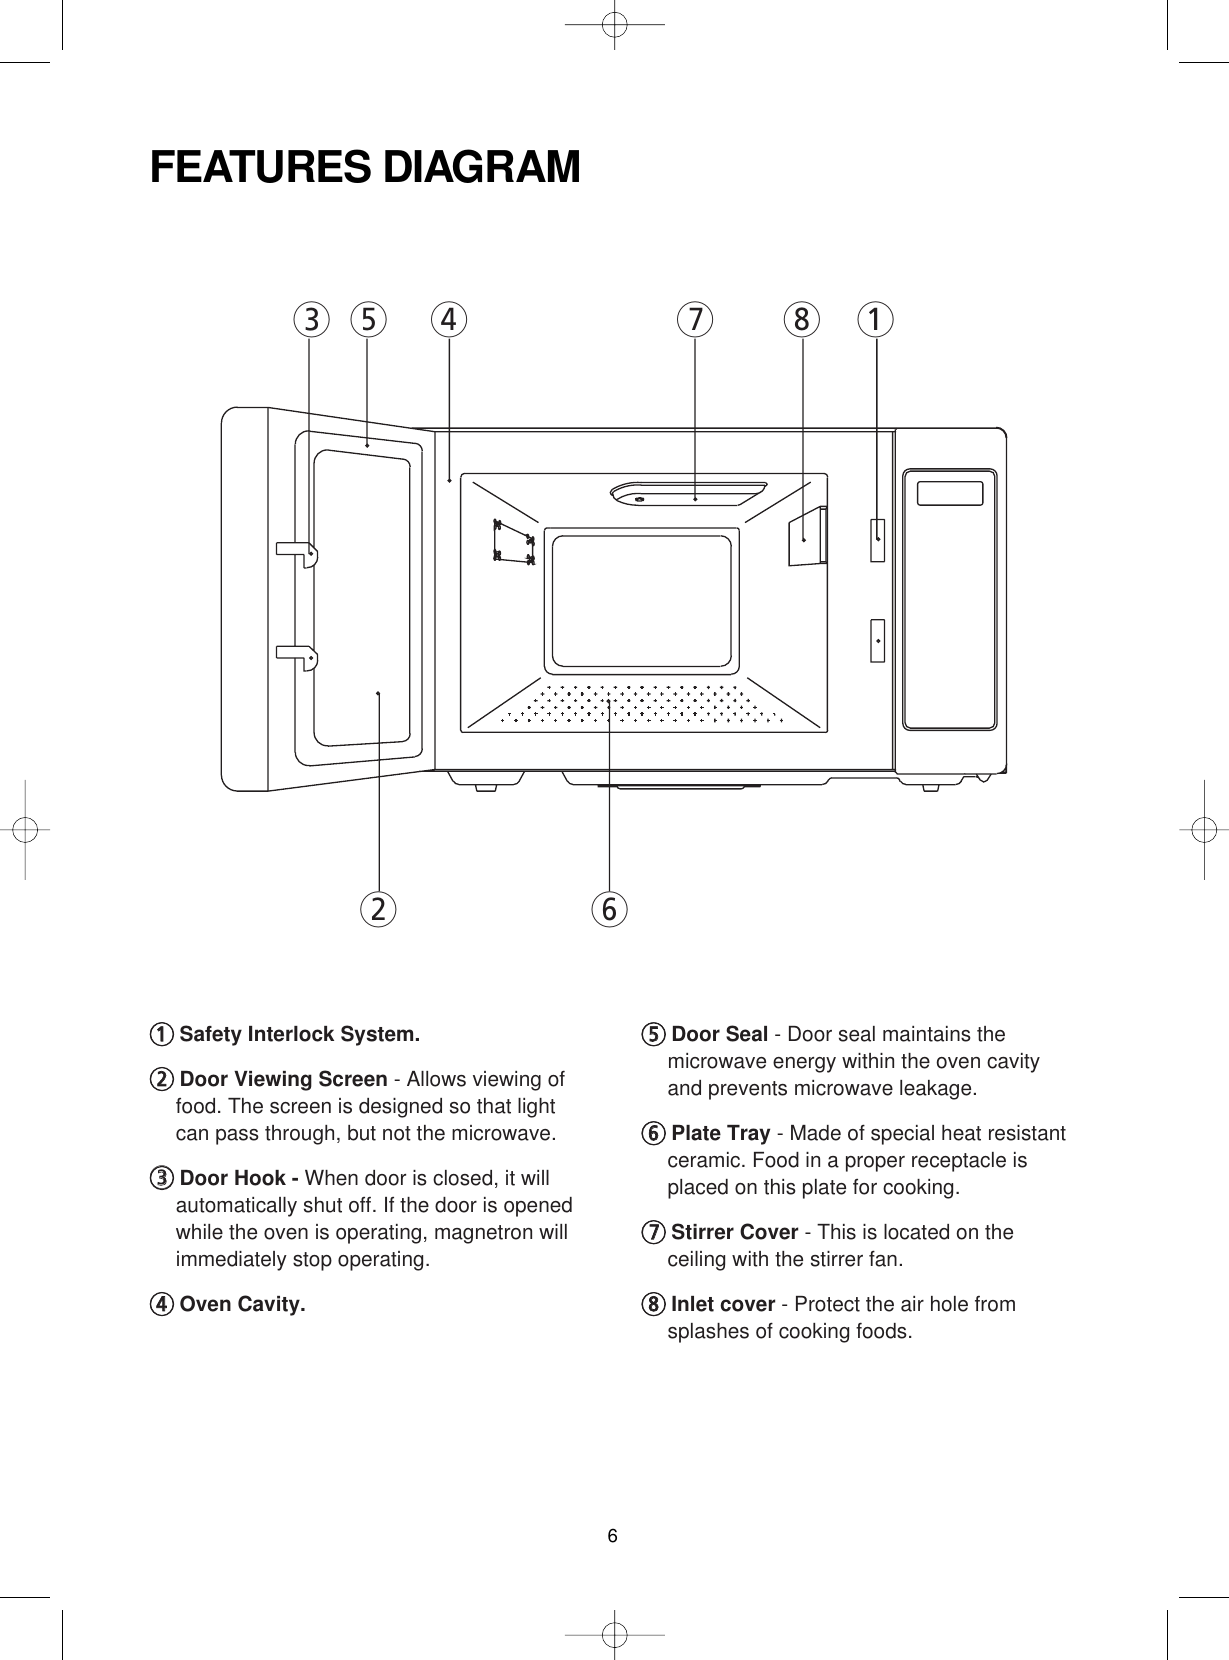 6FEATURES DIAGRAM11Safety Interlock System.22Door Viewing Screen - Allows viewing offood. The screen is designed so that lightcan pass through, but not the microwave. 33Door Hook - When door is closed, it willautomatically shut off. If the door is openedwhile the oven is operating, magnetron willimmediately stop operating.44Oven Cavity.55Door Seal - Door seal maintains themicrowave energy within the oven cavityand prevents microwave leakage.66Plate Tray - Made of special heat resistantceramic. Food in a proper receptacle isplaced on this plate for cooking.77Stirrer Cover - This is located on theceiling with the stirrer fan.88Inlet cover - Protect the air hole fromsplashes of cooking foods.  35264781